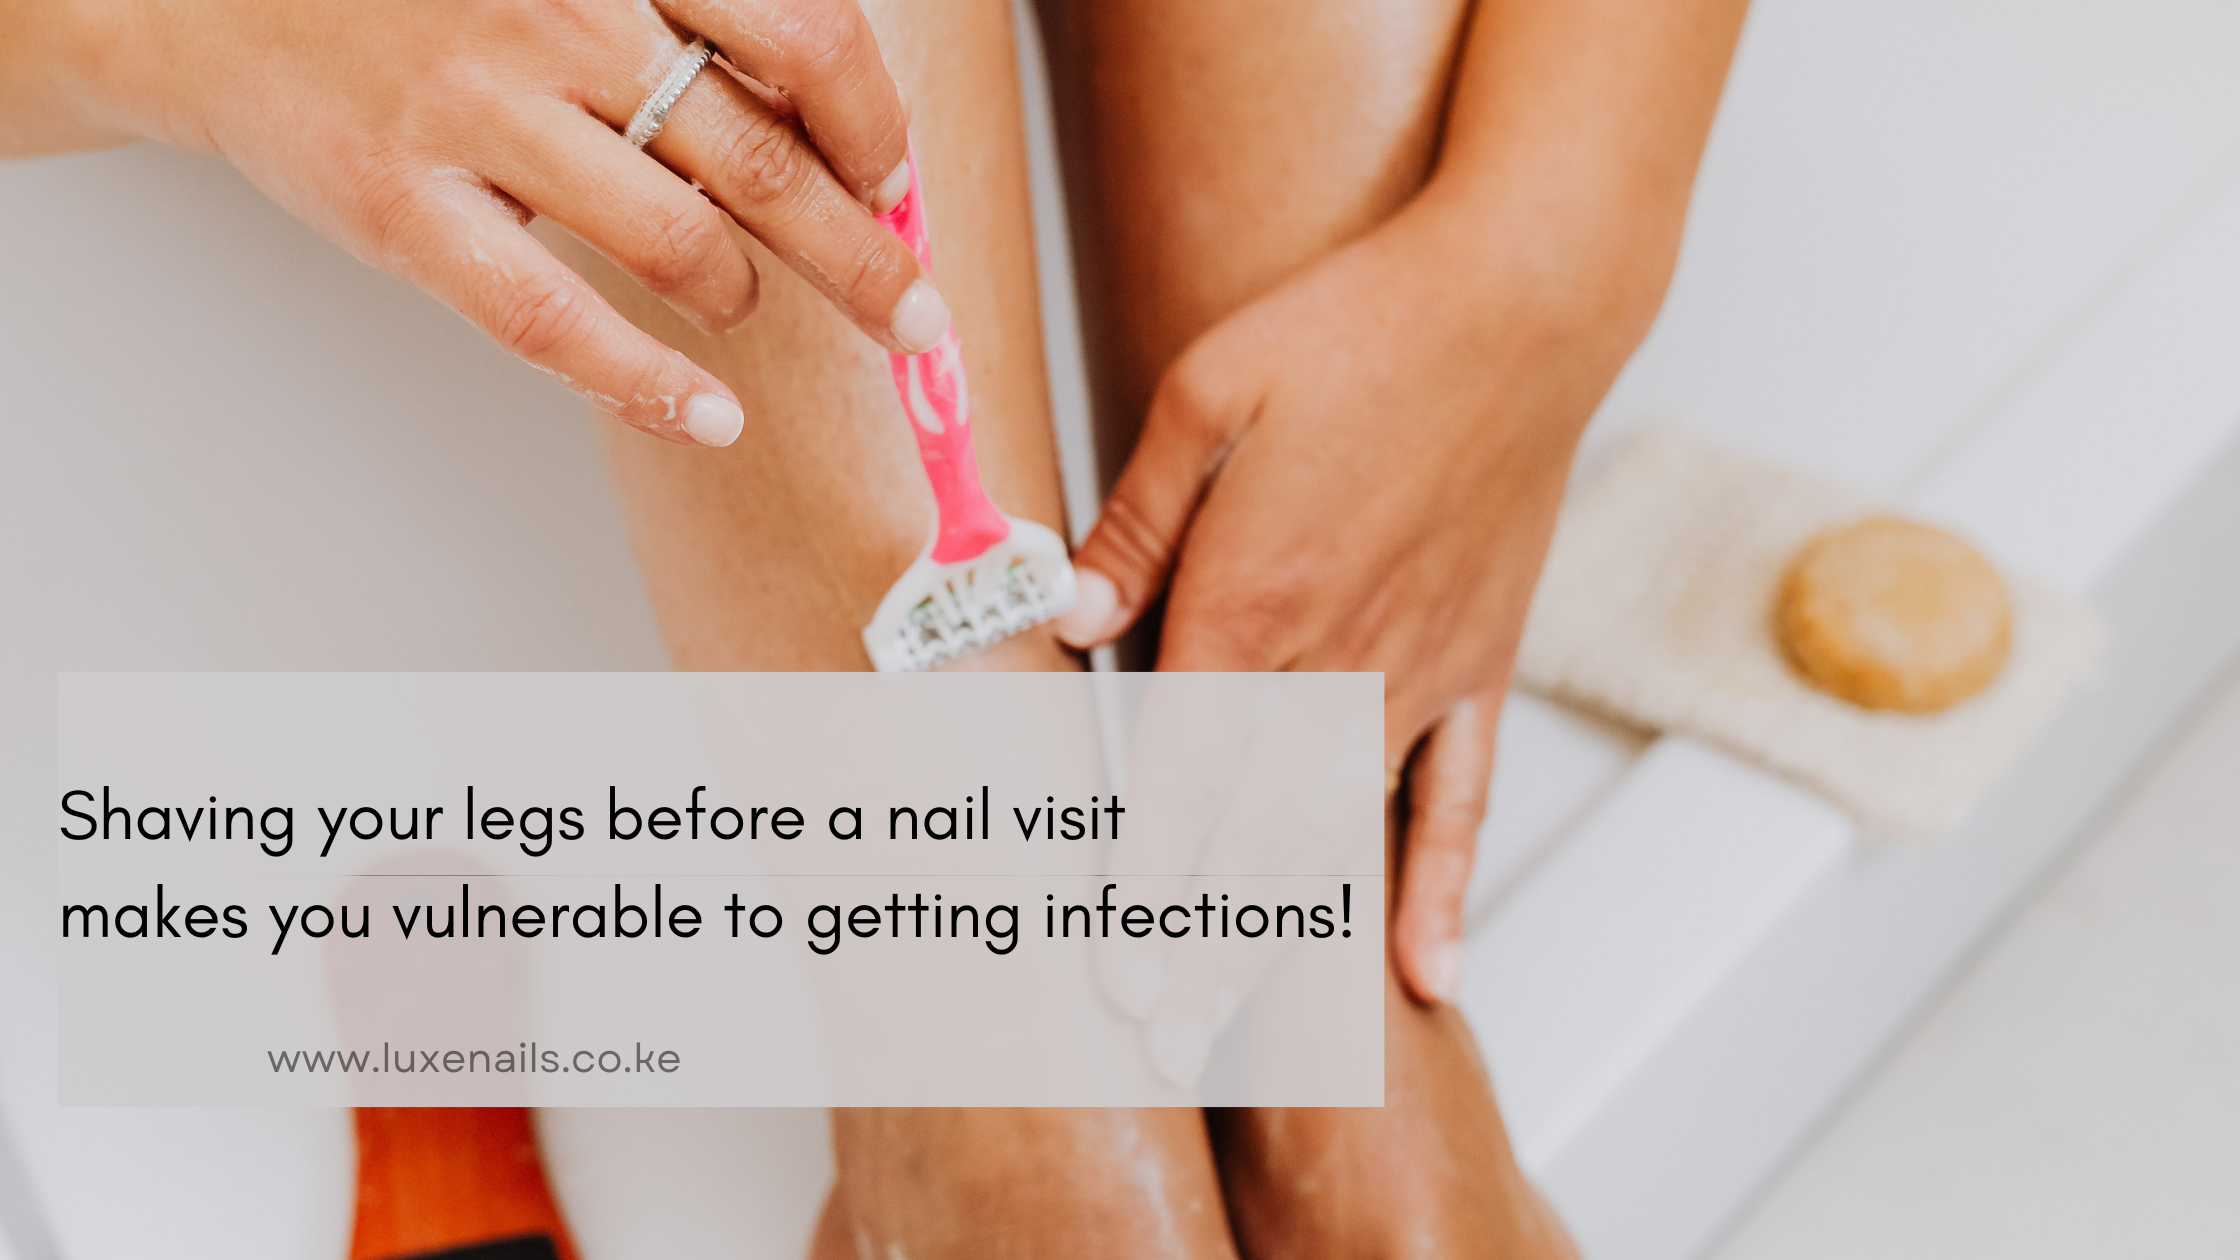 Shaving your legs before a nail salon visit puts you at risk of getting infections